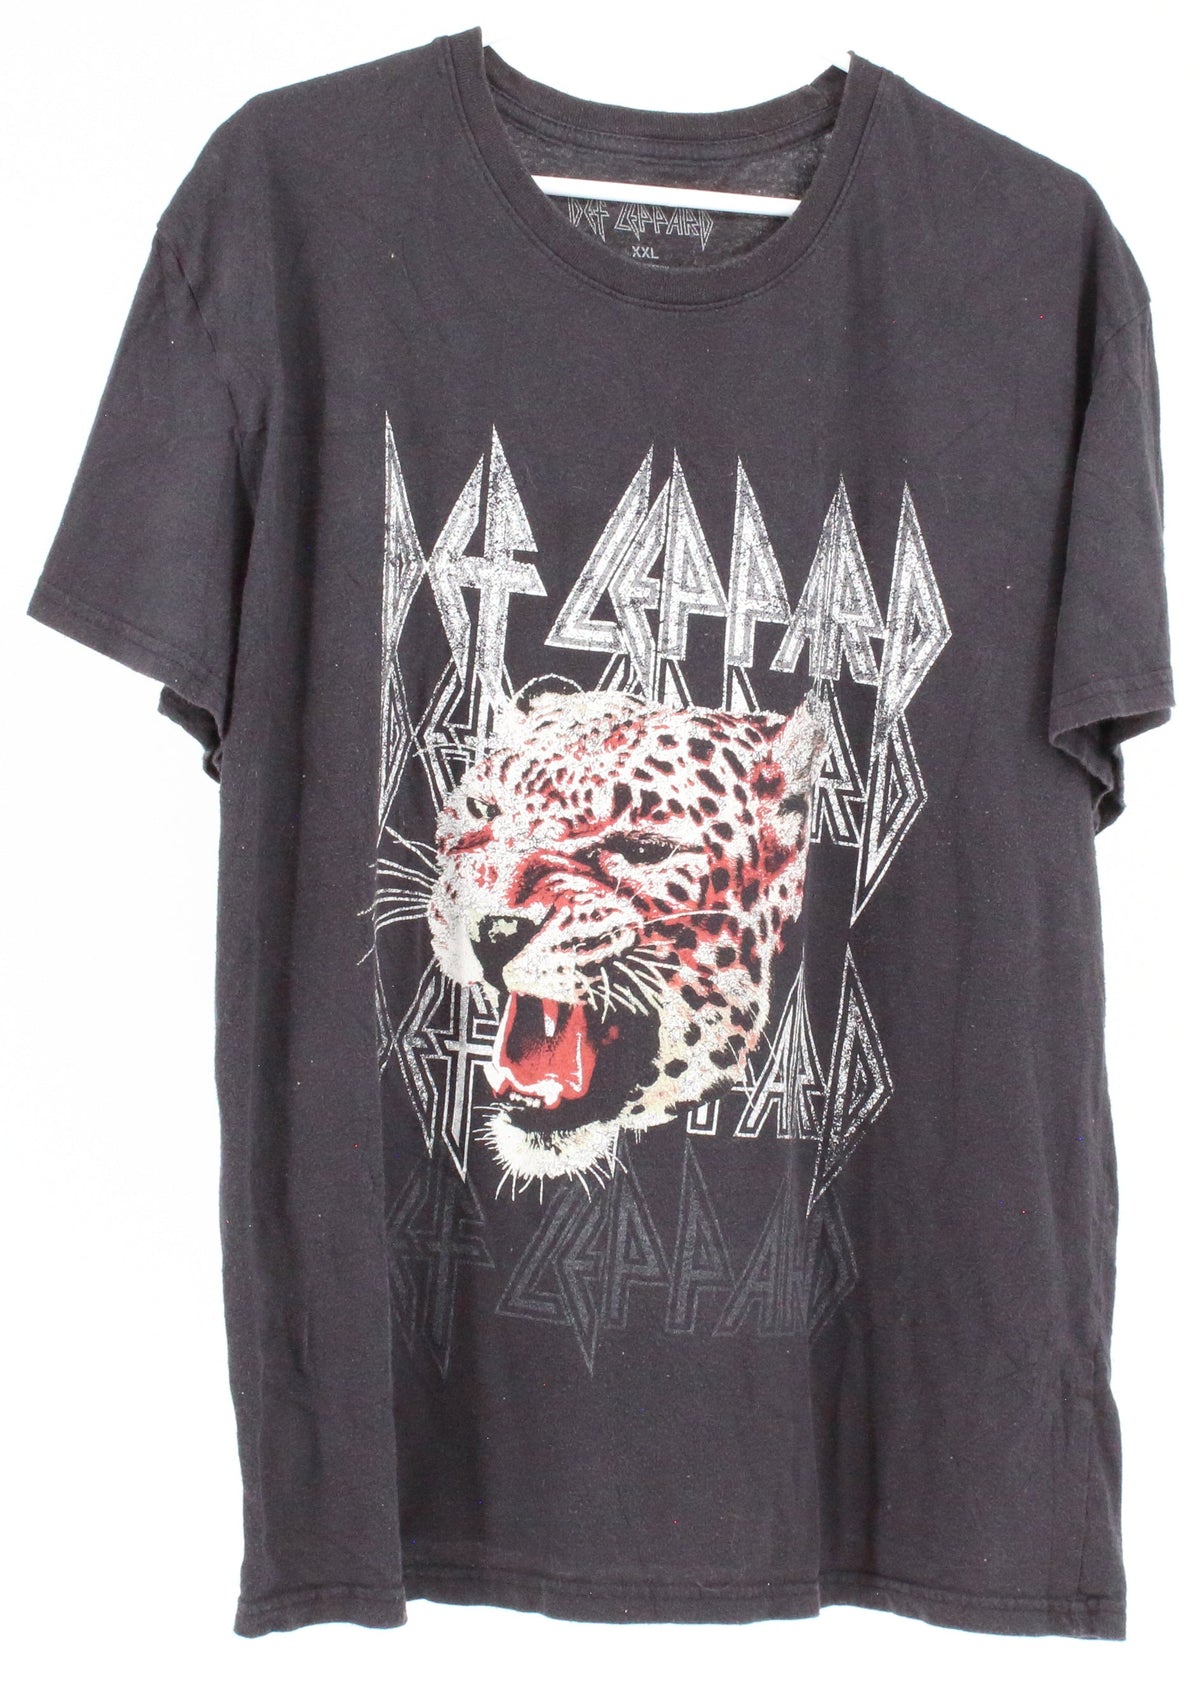 DEF Leppard Black Front Graphic Band Tee